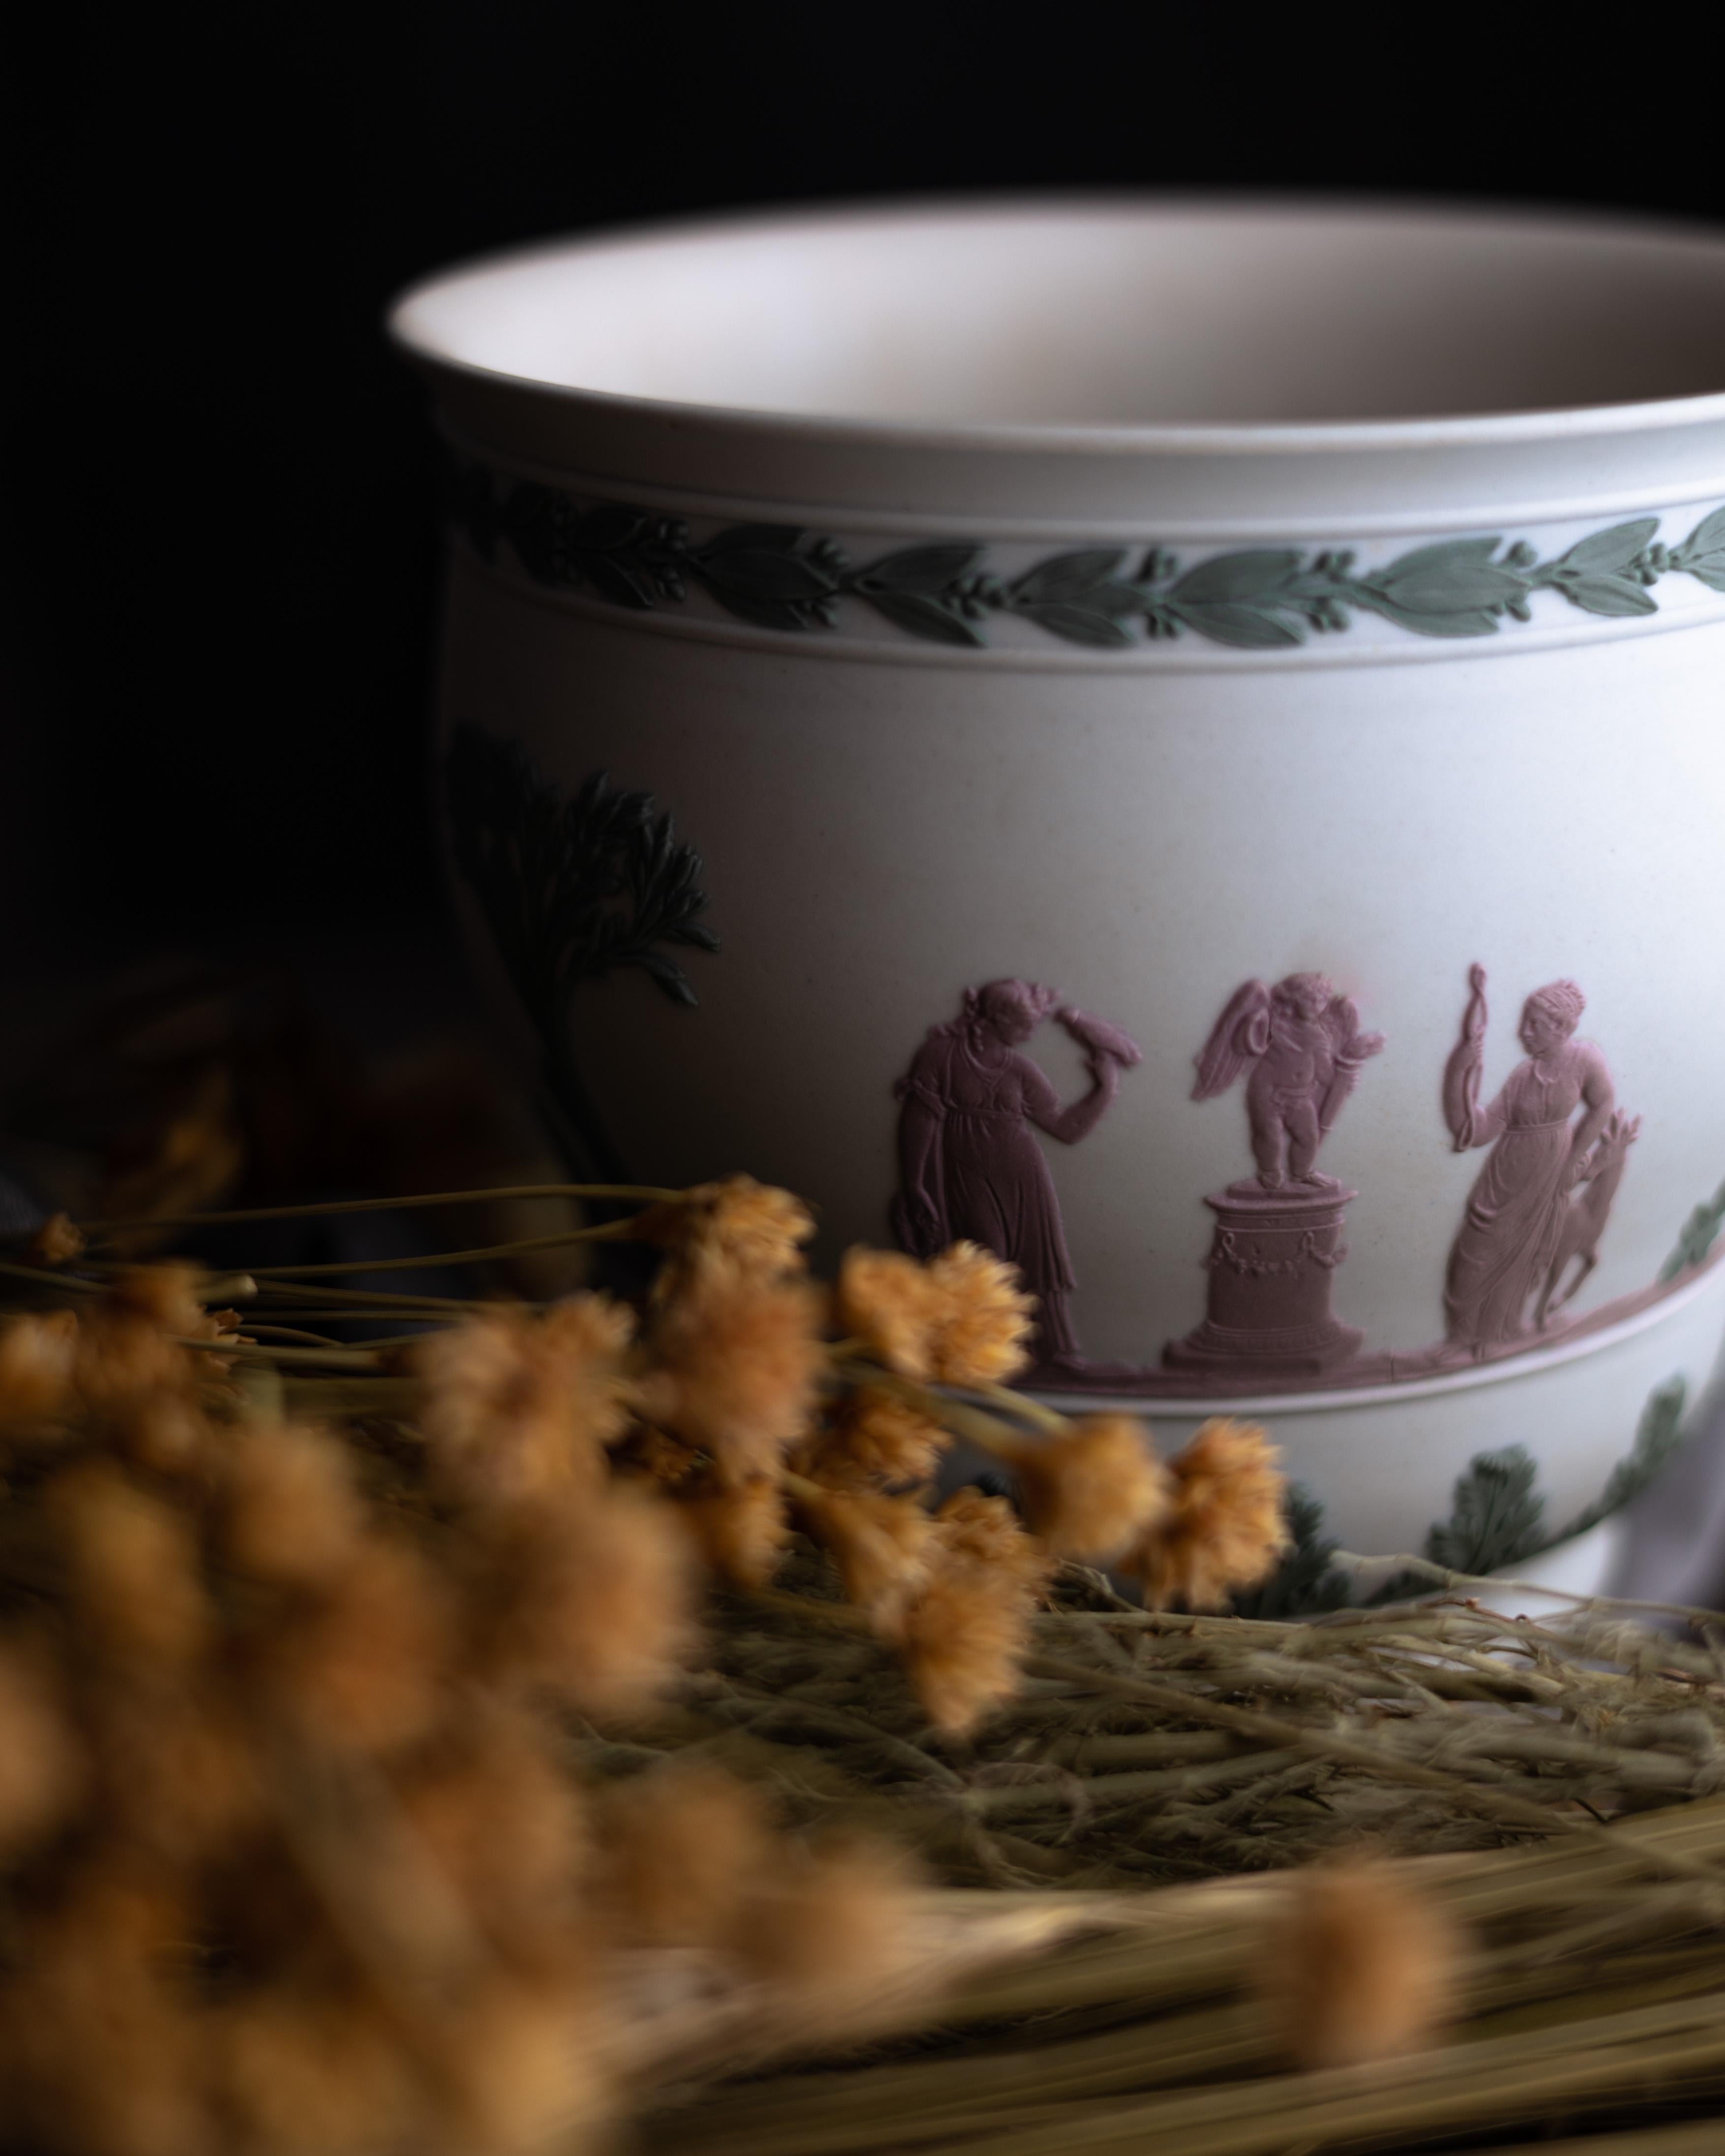 A Wedgwood jardiniere with lilac and sage details on a white jasperware ground.

Jasperware is perhaps the quintessential Wedgwood clay body and is even considered by some to be a ceramic development on par with porcelain. Originally developed in